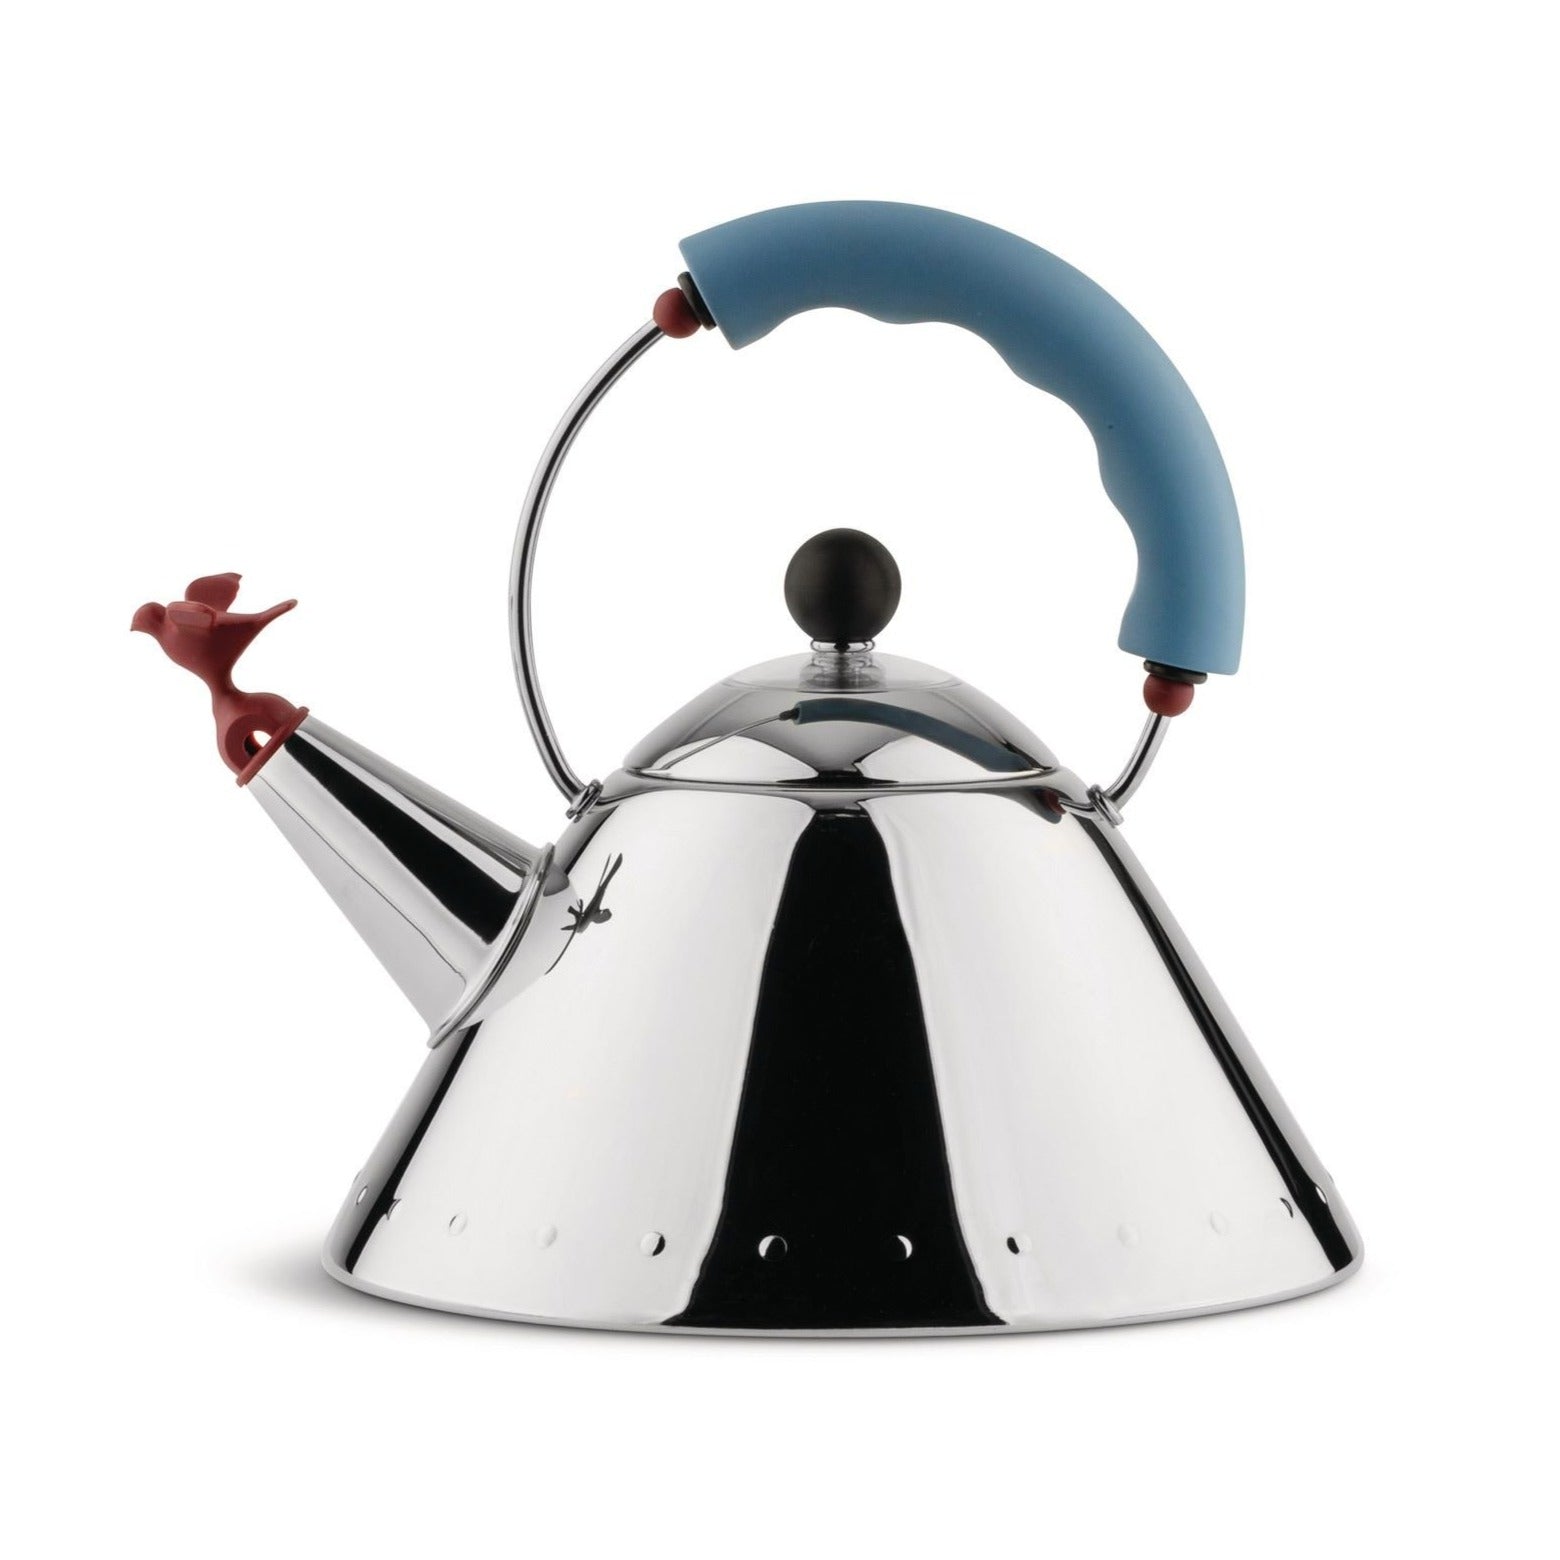 michael graves tea kettle by alessi - grounded